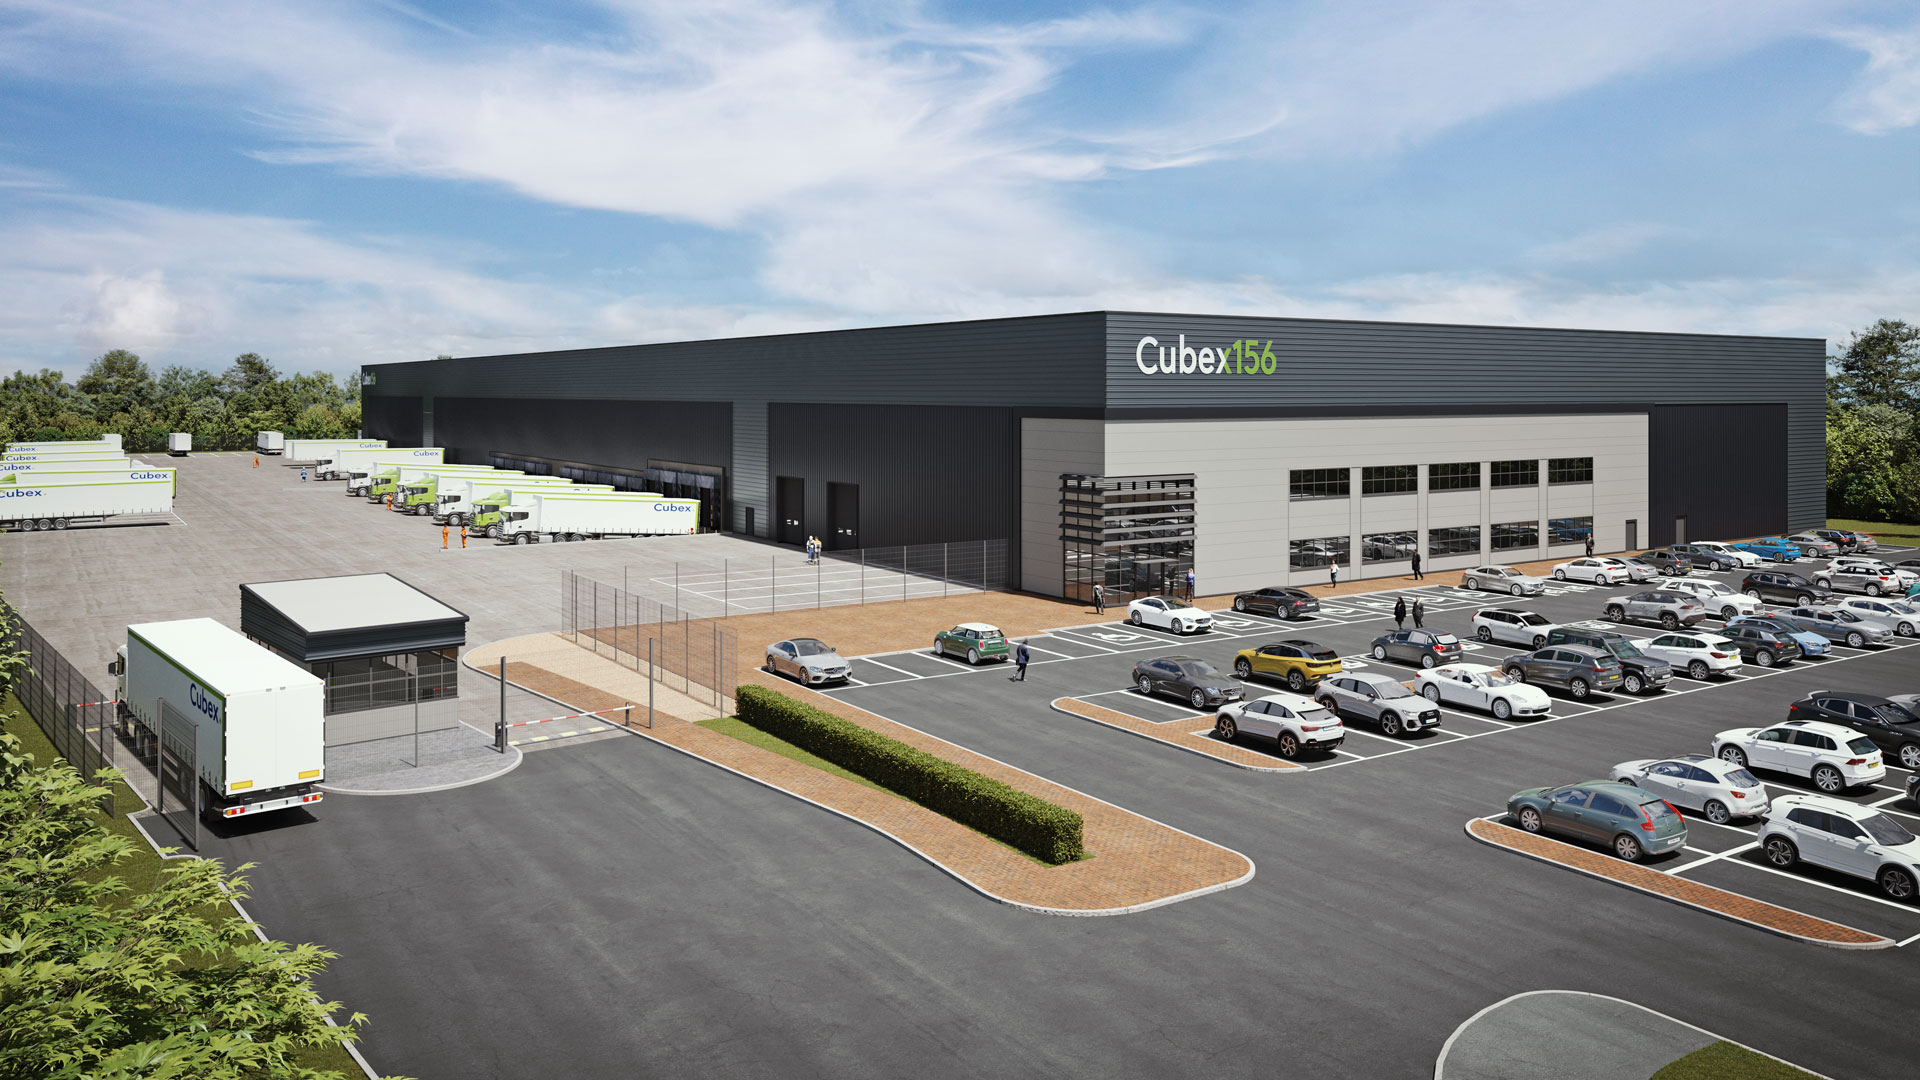 Cubex 156 - Warehouse To Let / For Sale, M5 Junction 22 near Bridgwater, Avonmouth